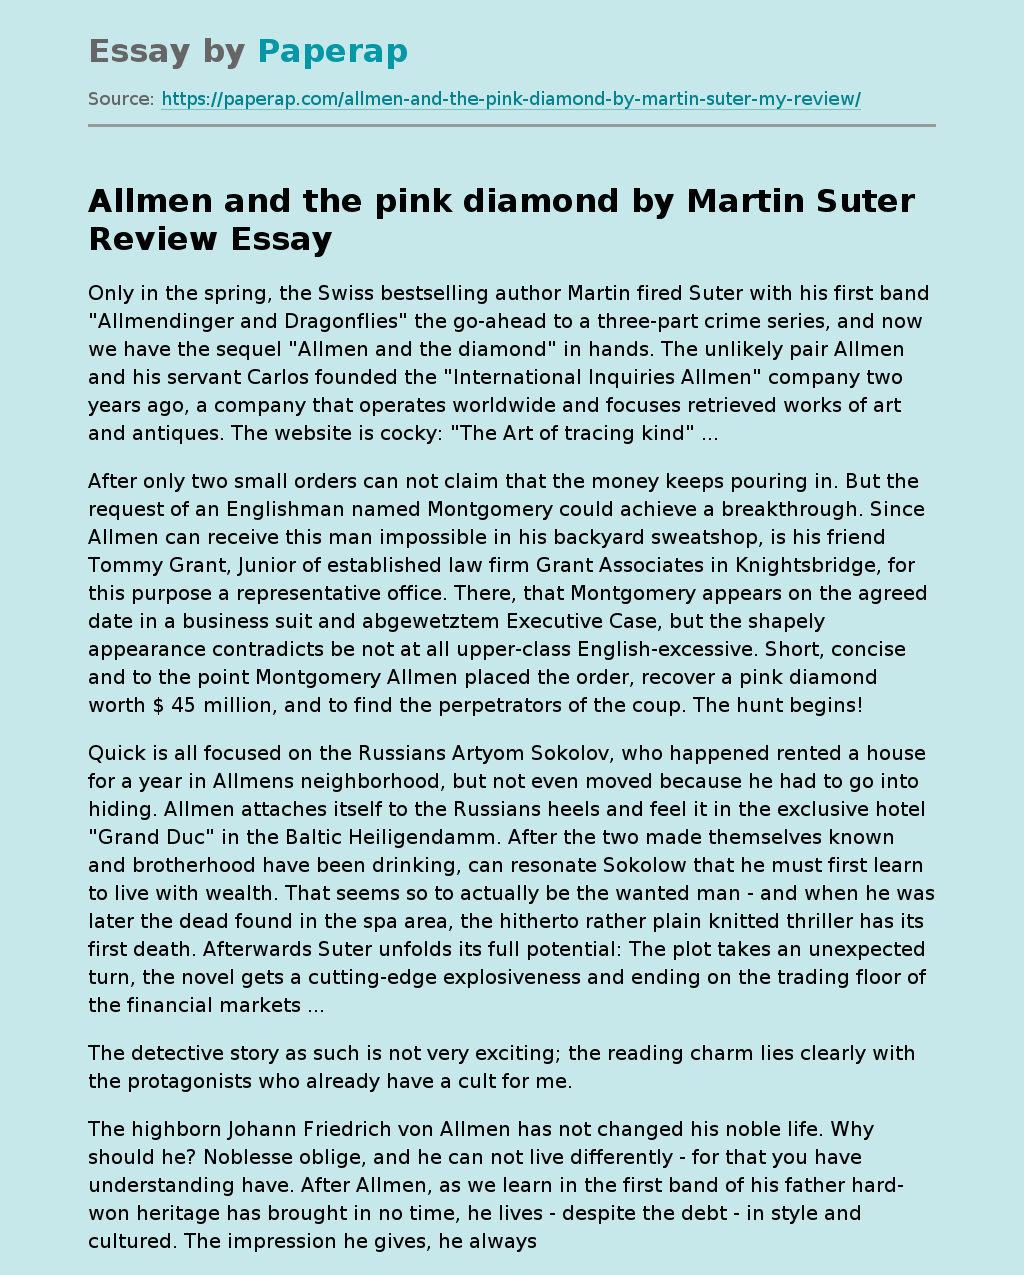 Allmen and the pink diamond by Martin Suter Review